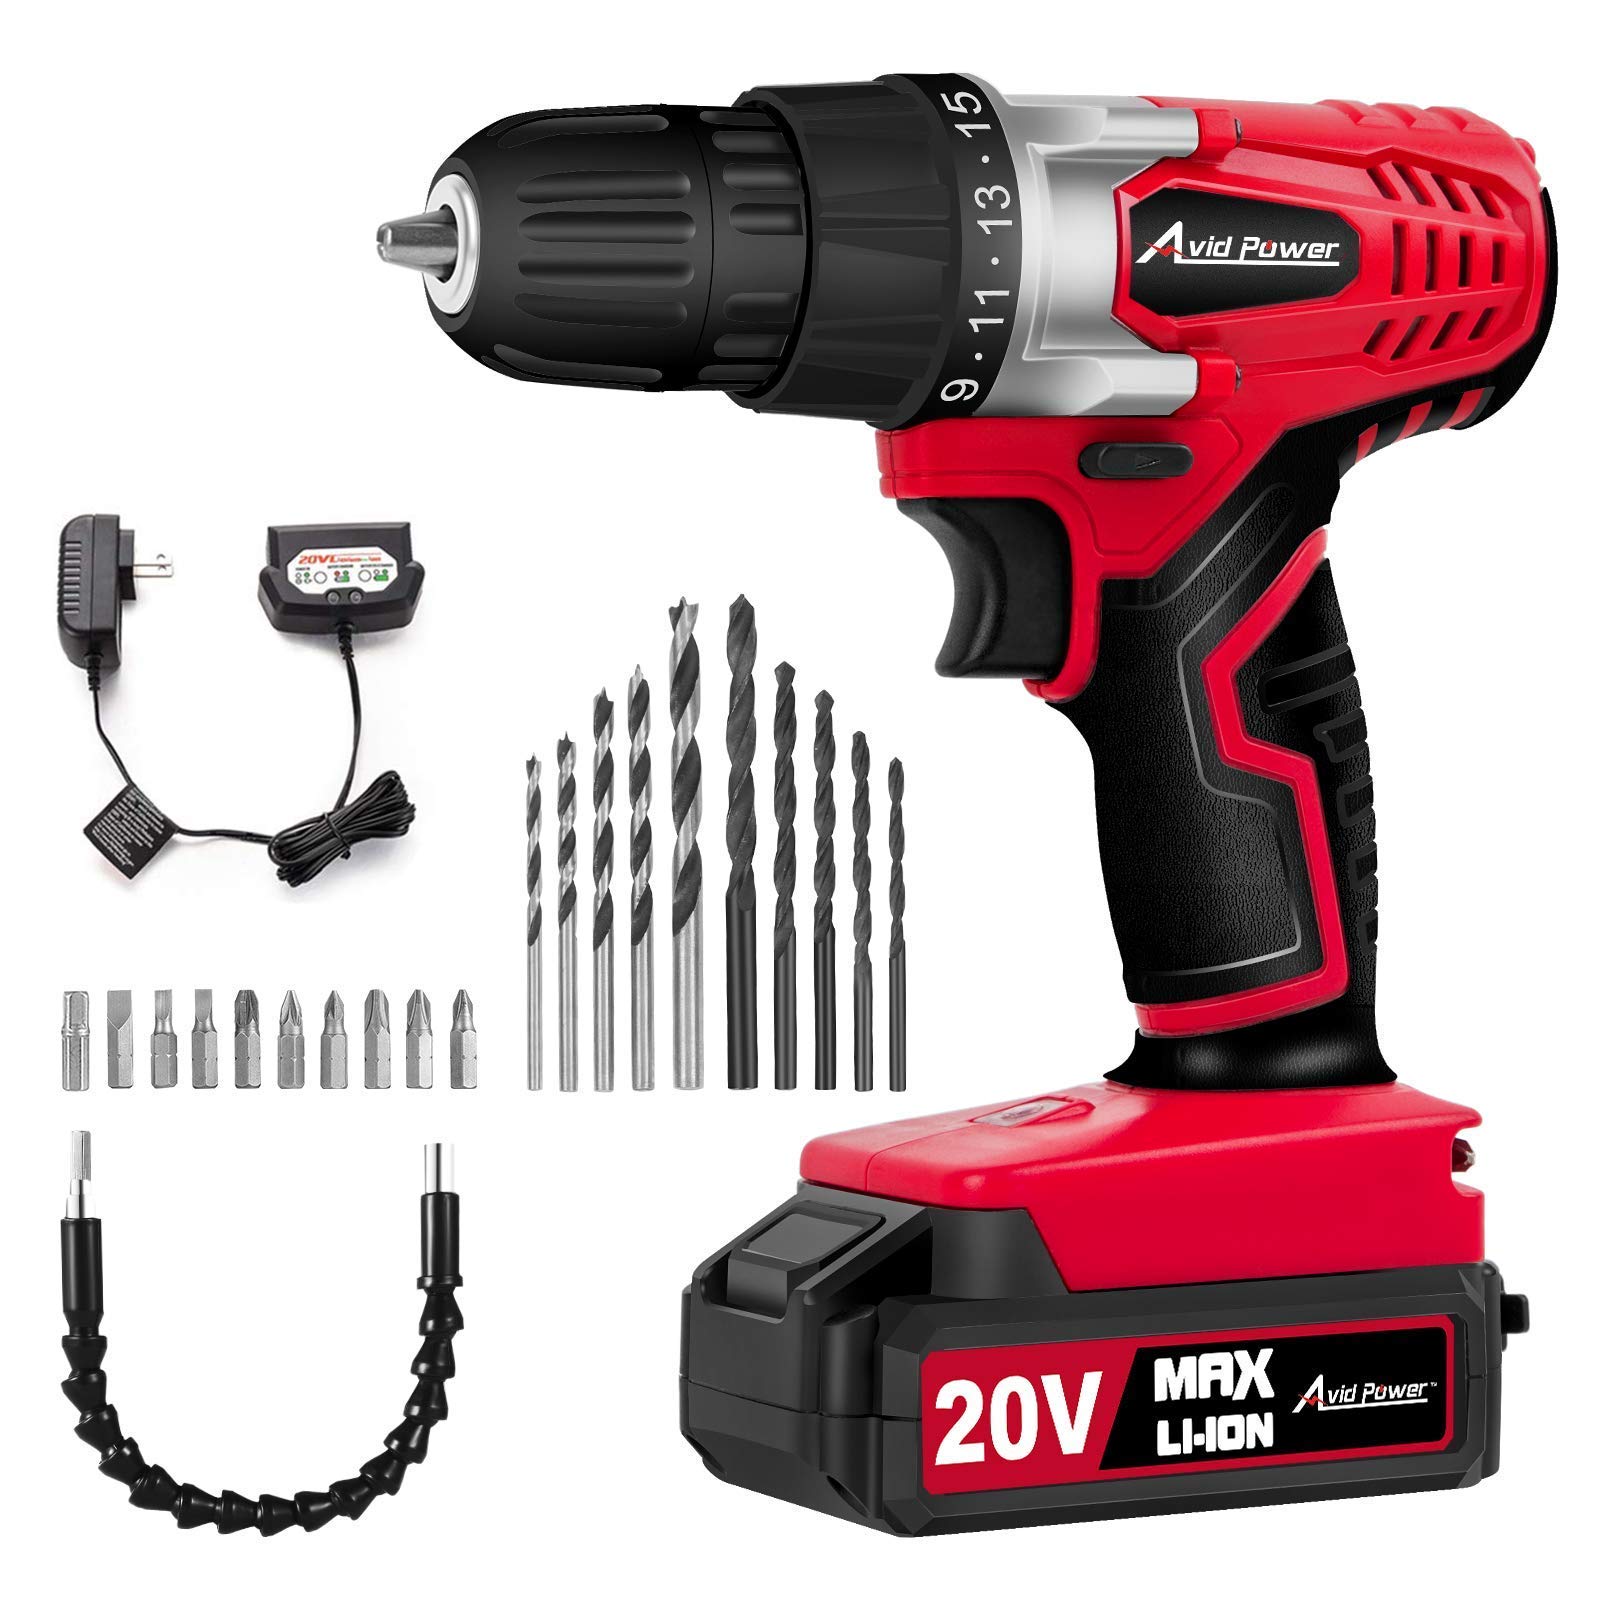 AVID POWER Tire Inflator Air Compressor Bundle with 20V Cordless Drill Set with 22pcs Drill Bits